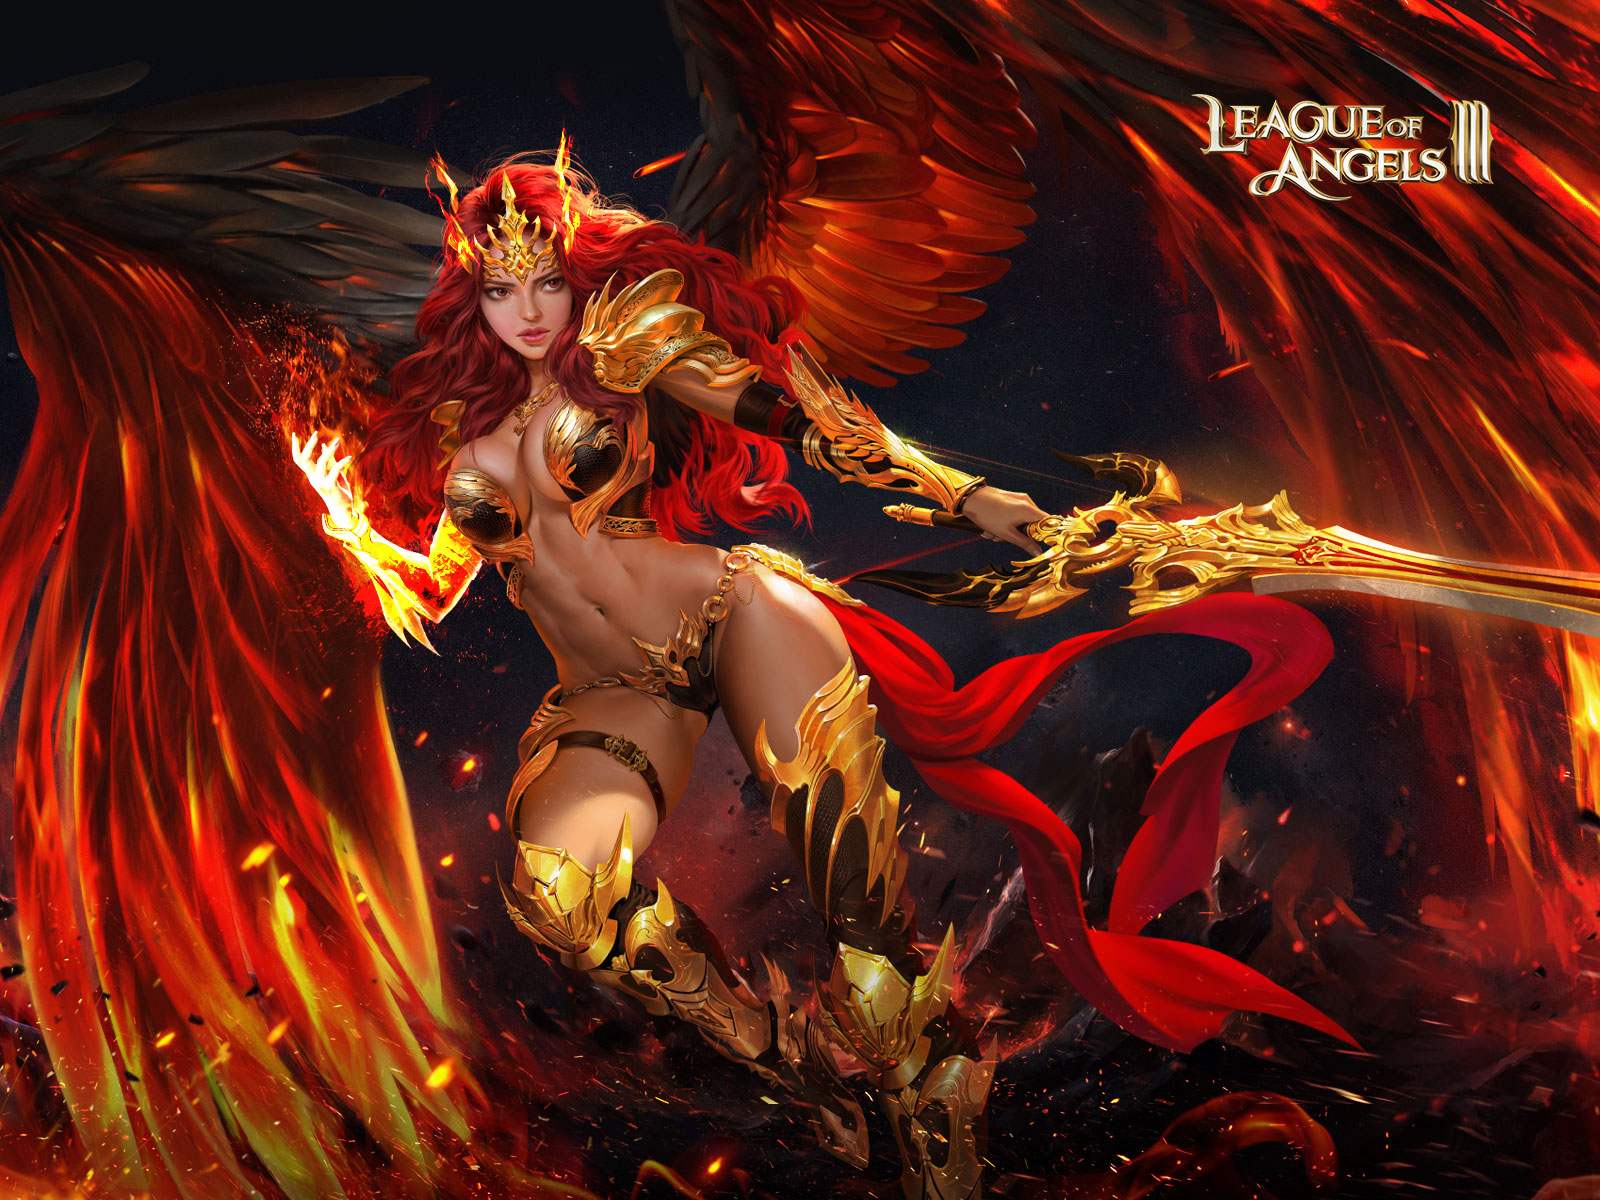 League of Angels - Battle the Evil with Your Angels!